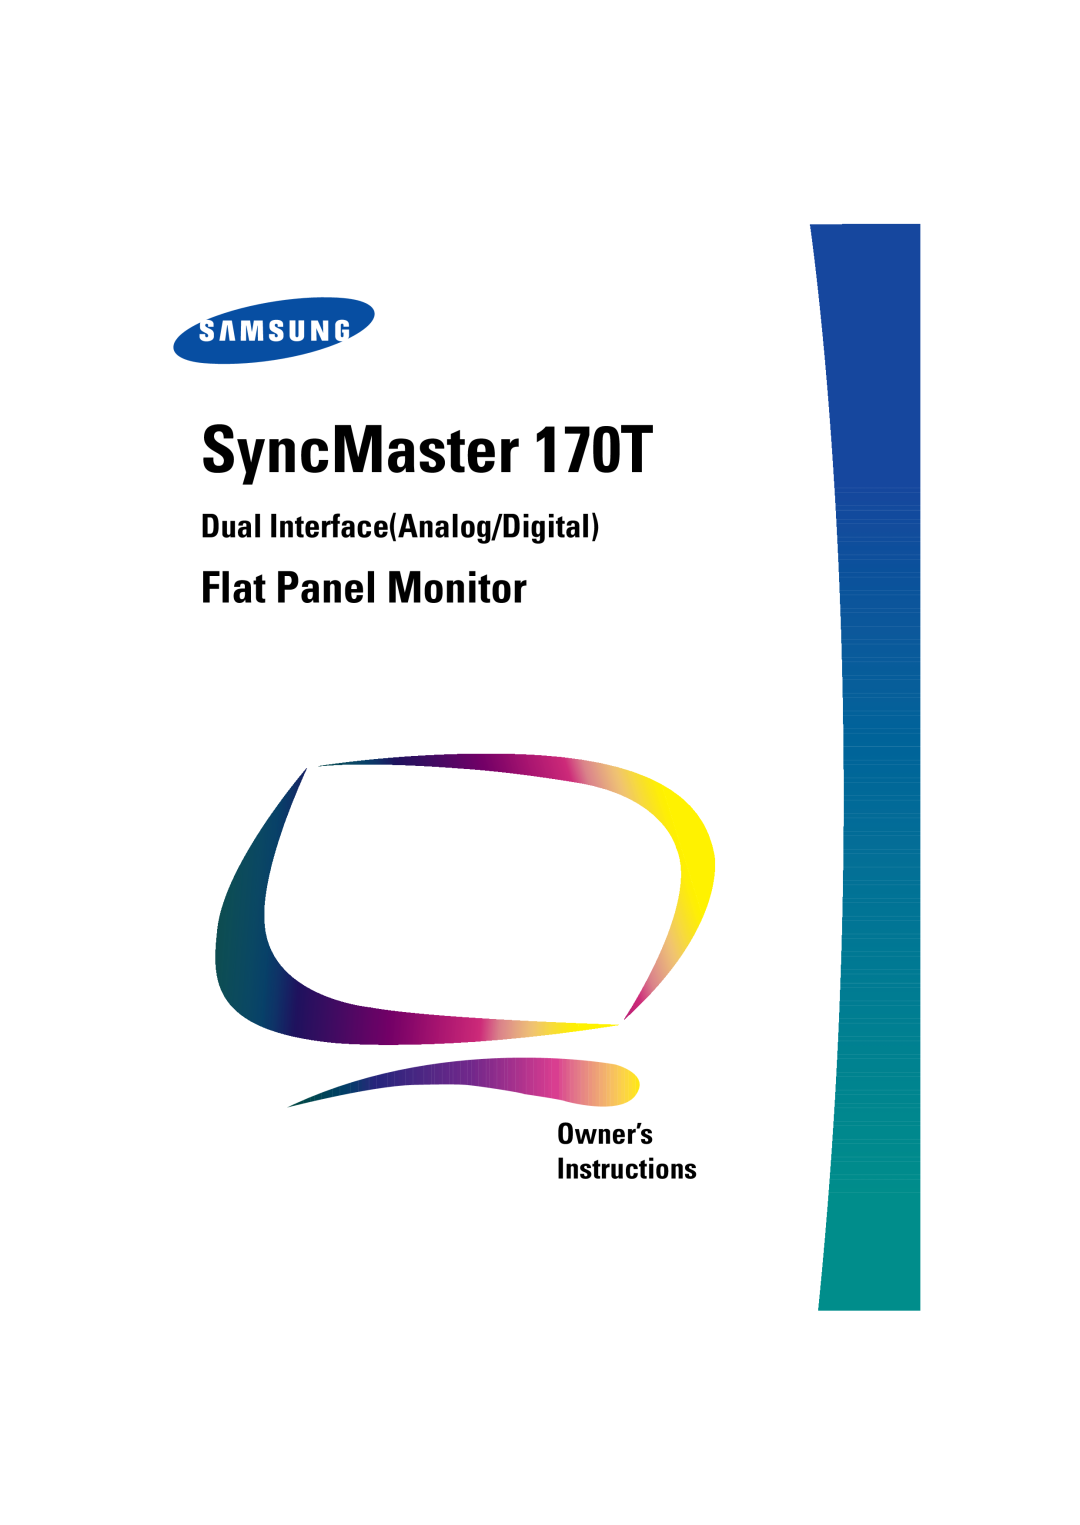 Samsung manual SyncMaster 170T, Flat Panel Monitor, Dual InterfaceAnalog/Digital, Owner’s Instructions 